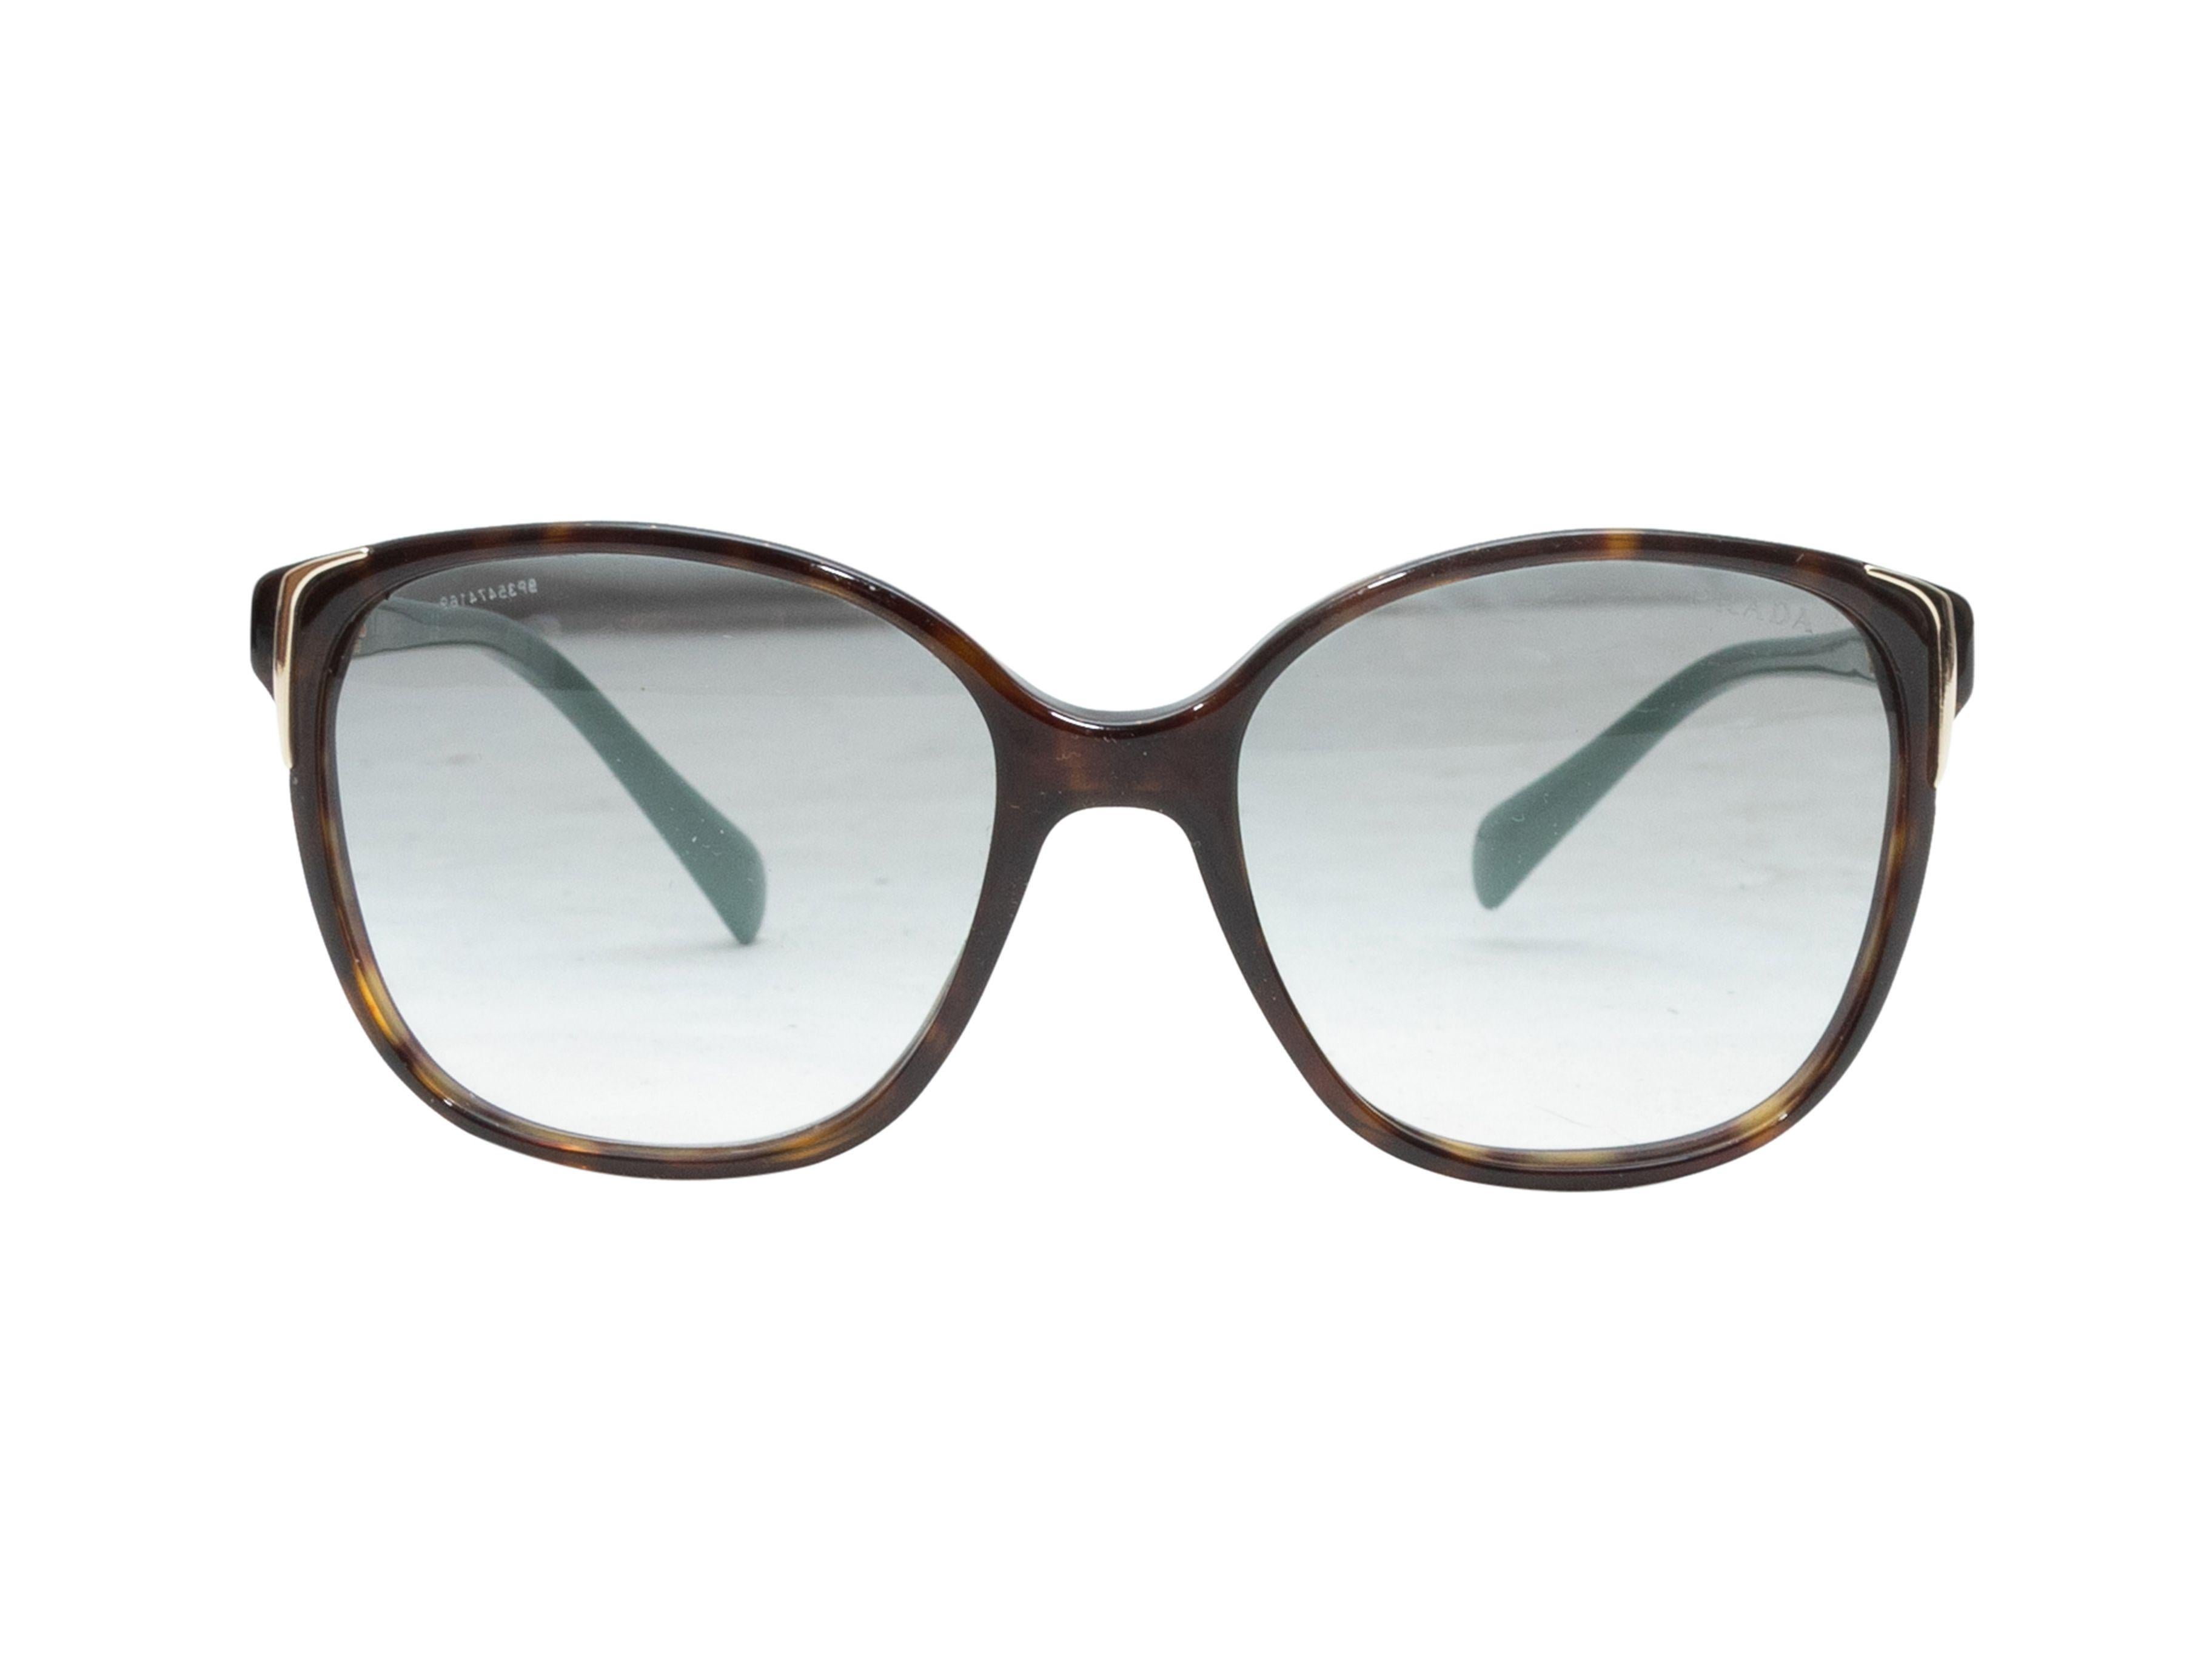 Product Details: Tortoiseshell and teal acetate sunglasses by Prada. Teal tinted lenses. 5.5